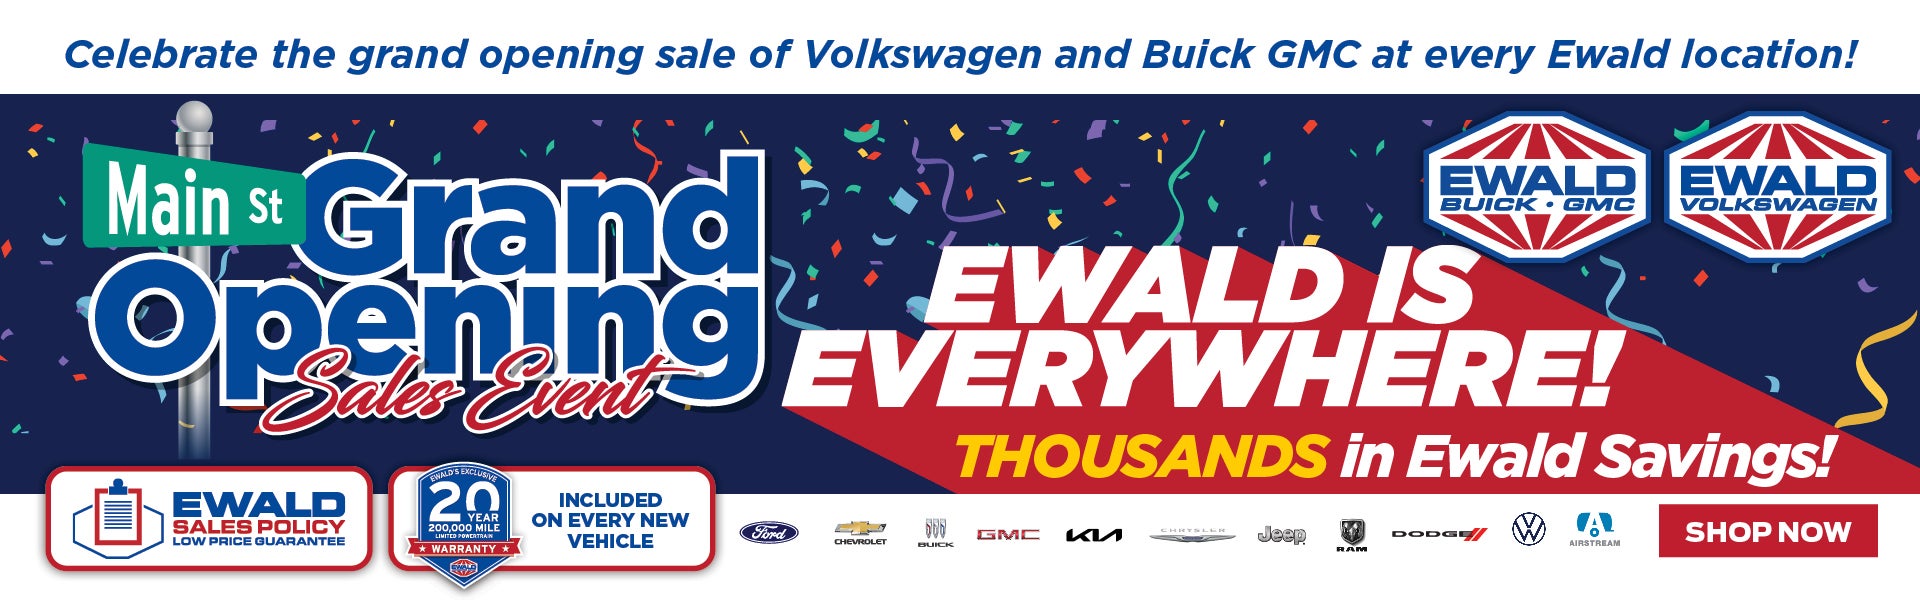 Ewald's Grand Opening Sales